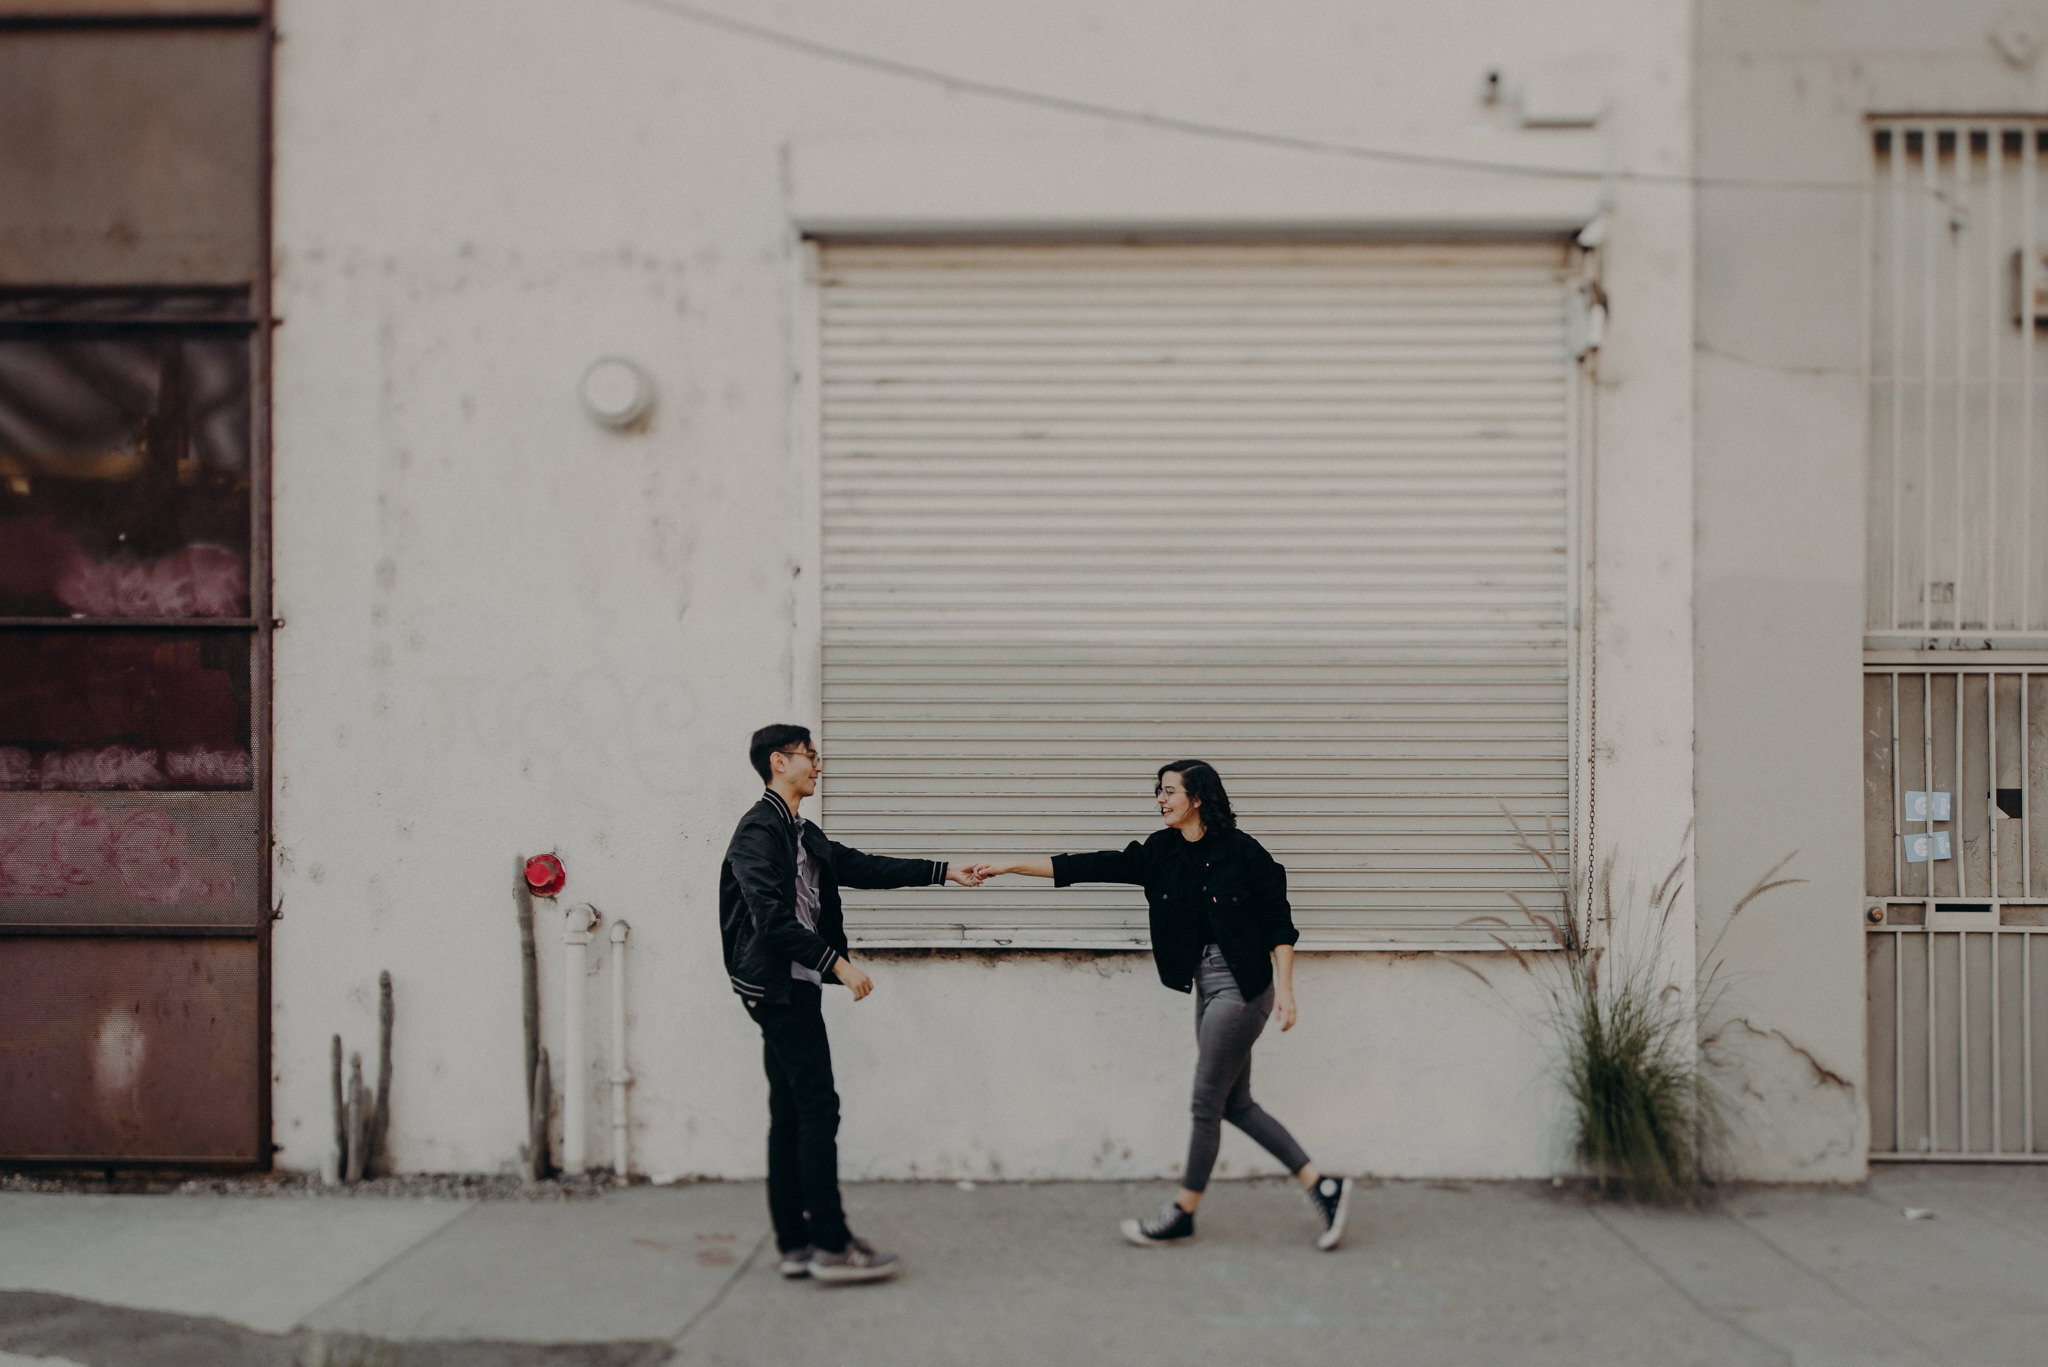 wedding photographer in los angeles - long beach wedding photography - dtla engagement session - isaiahandtaylor.com -021.jpg